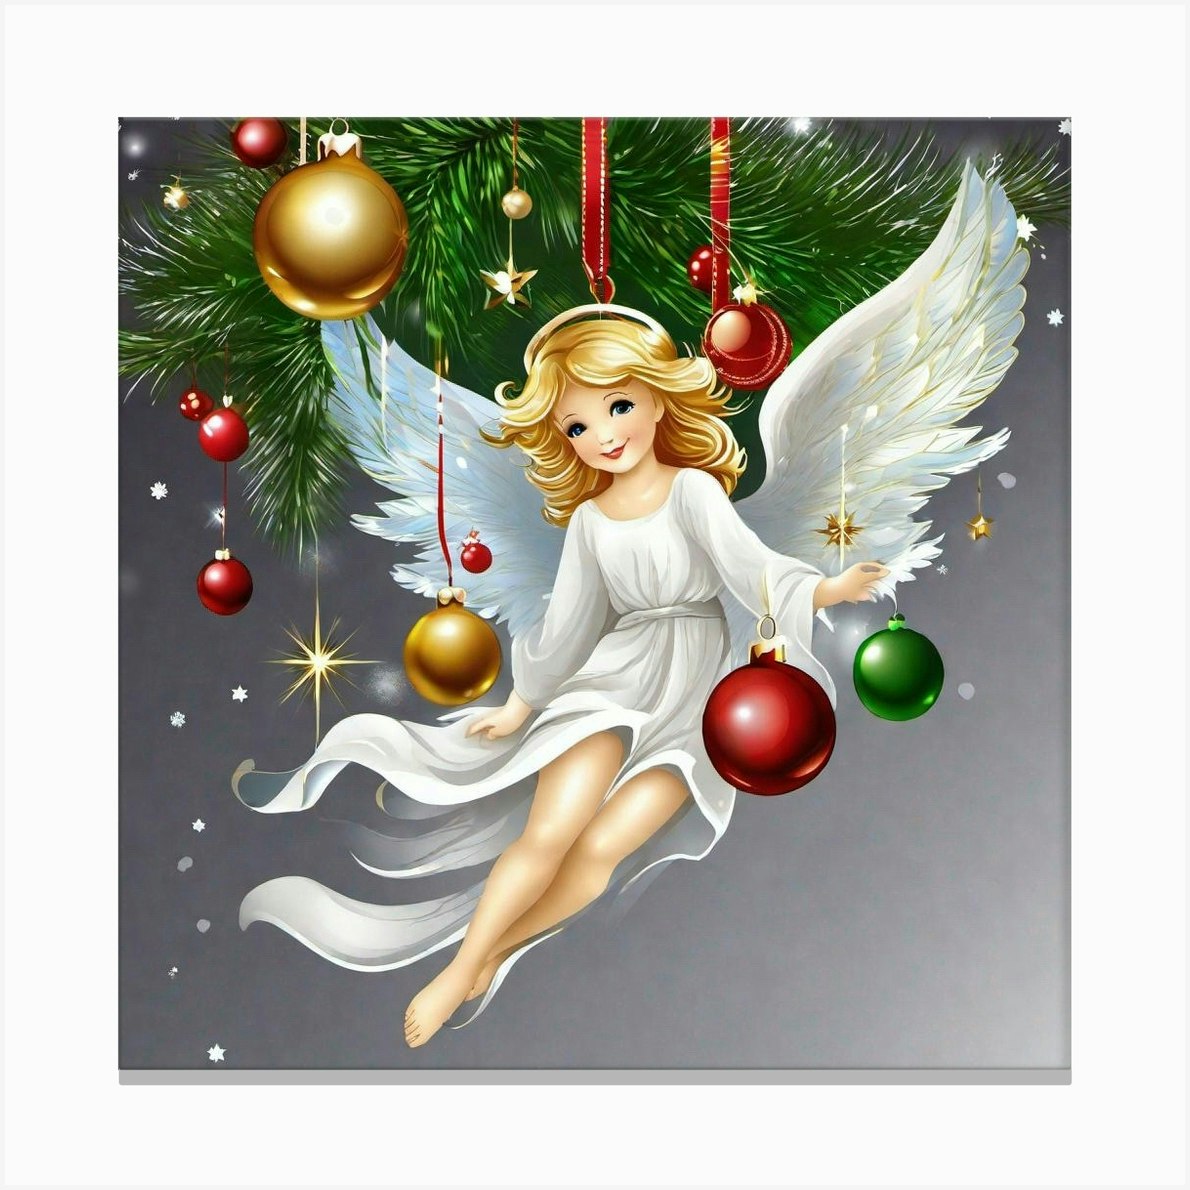 Angel Christmas Tree 1 Canvas Print by Noctarius - Fy